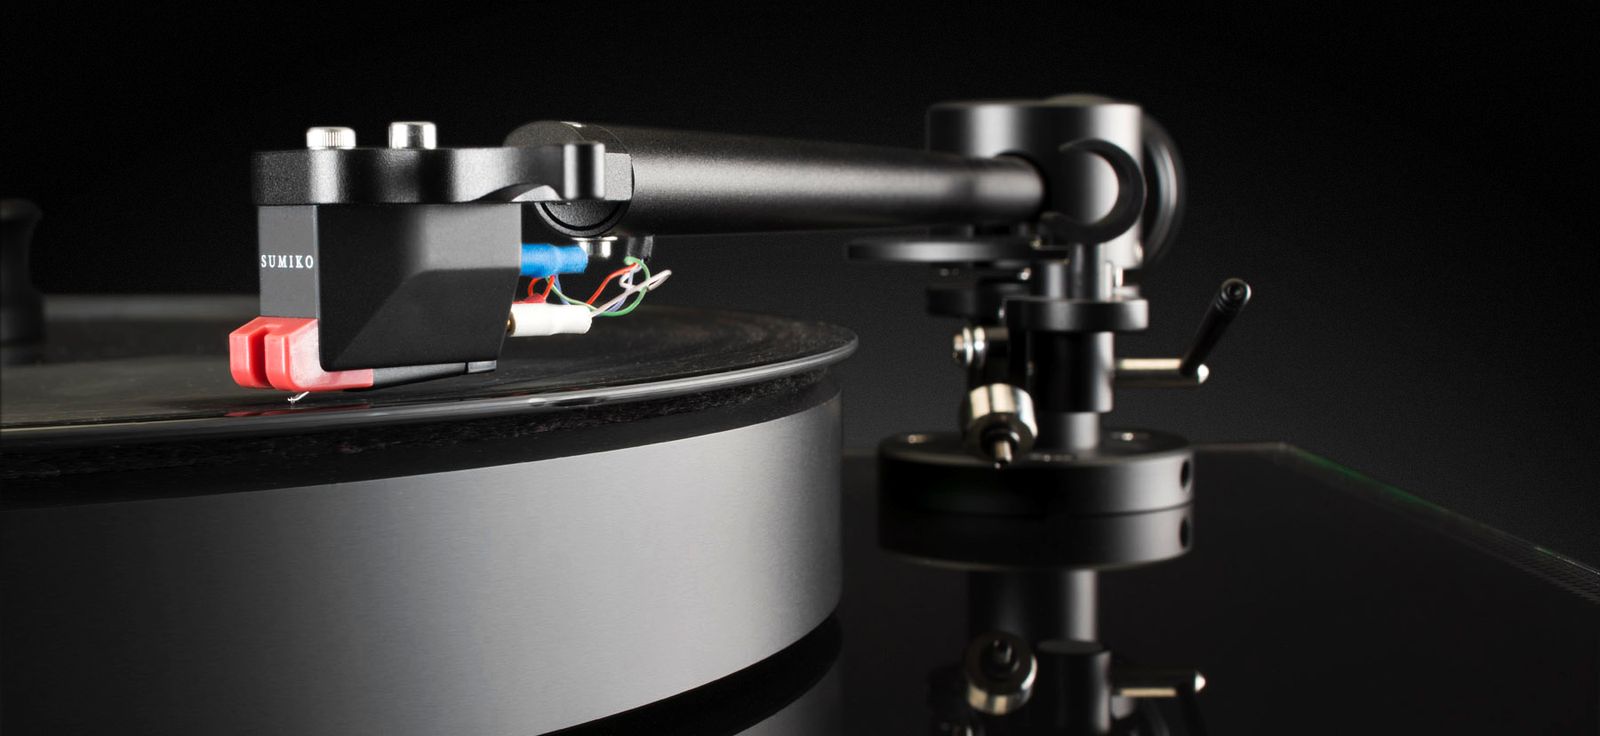 McIntosh MT2 now ships with the Sumiko Moonstone moving magnet phono cartridge installed